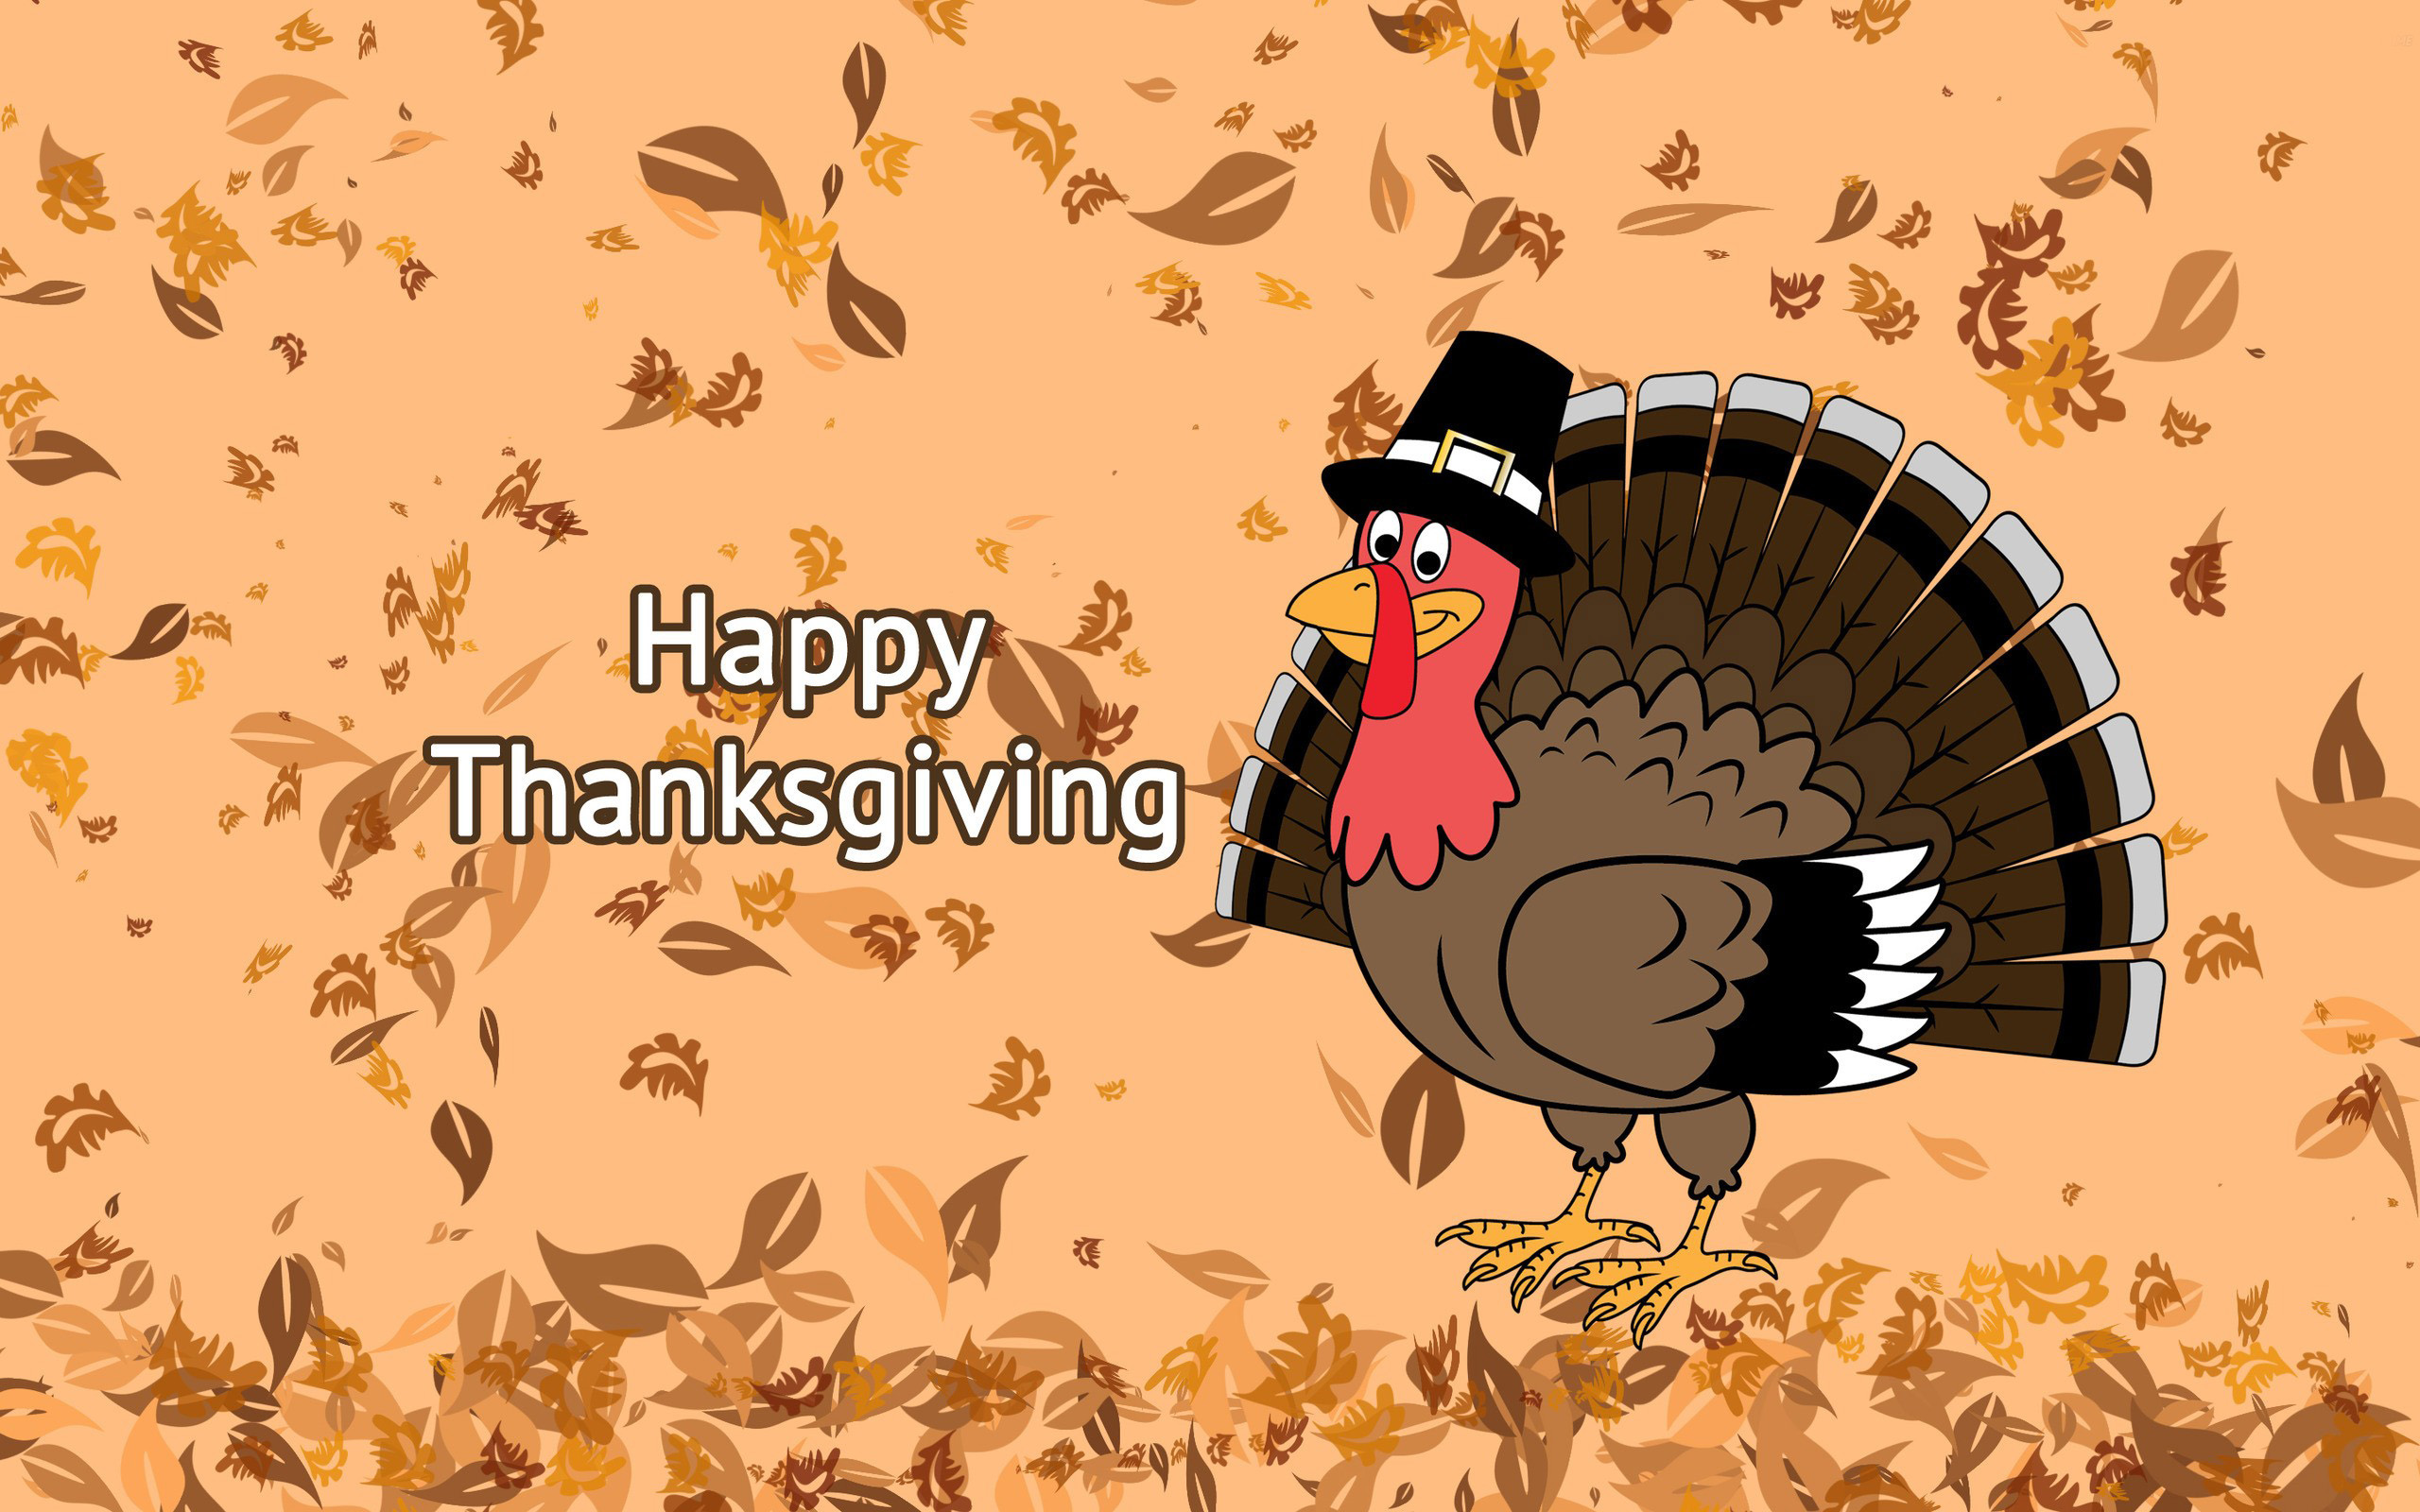 Happy Thanksgiving 2016 Images Wallpapers, Backgrounds, Images